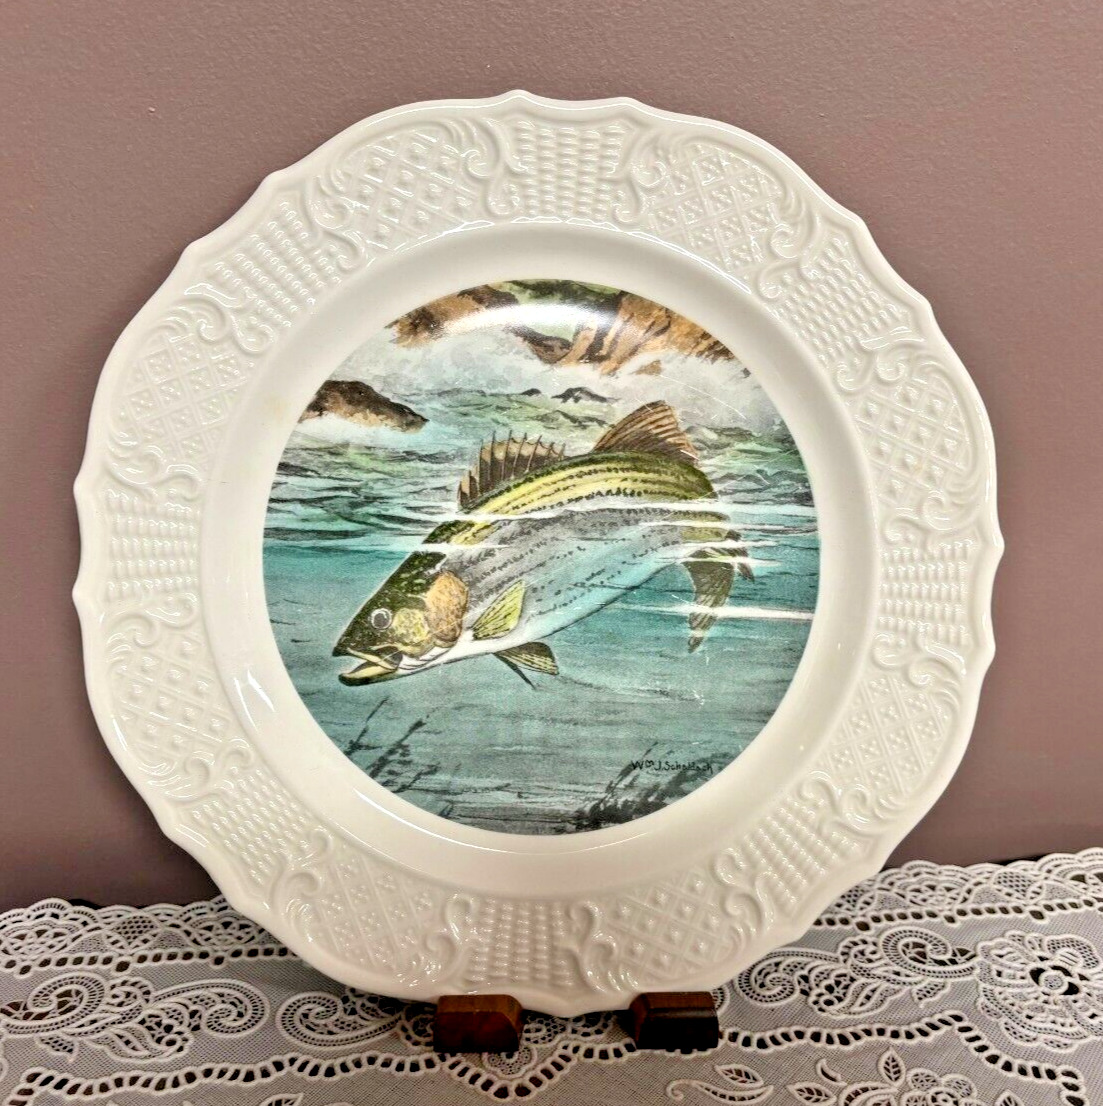 Vintage Plate by DeLano Studios - Fish Series House Seagram -Striped Bass